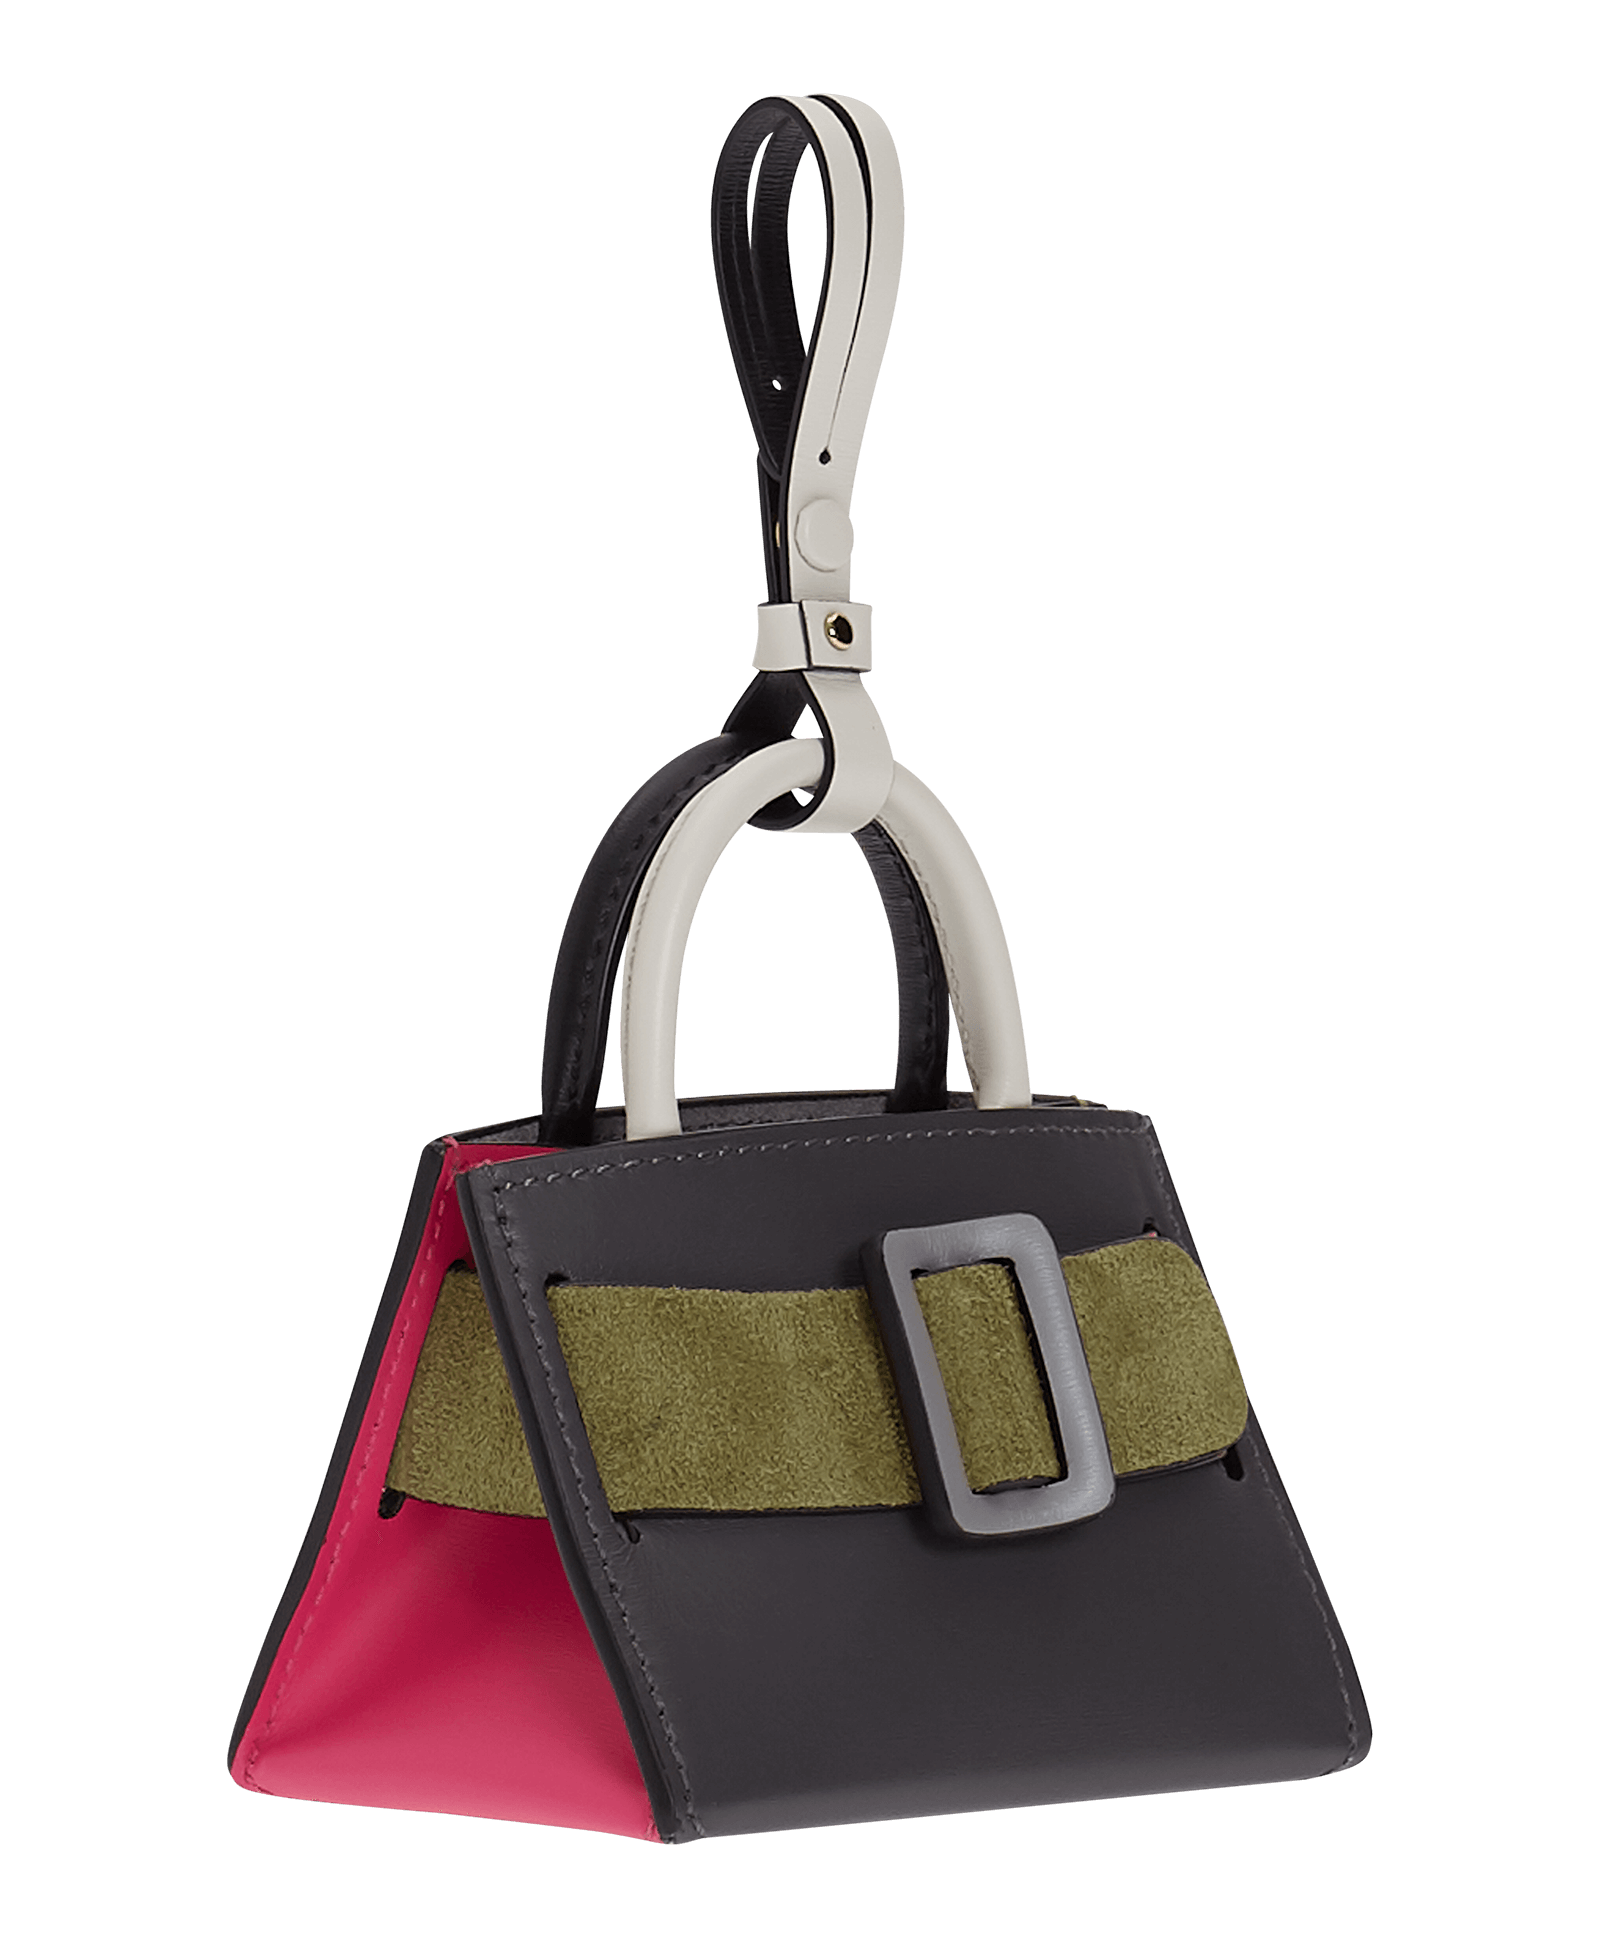 Miniature structured handbag charm with a leather buckle on the front, carry strap, and twin handles. Made with smooth calfskin leather.